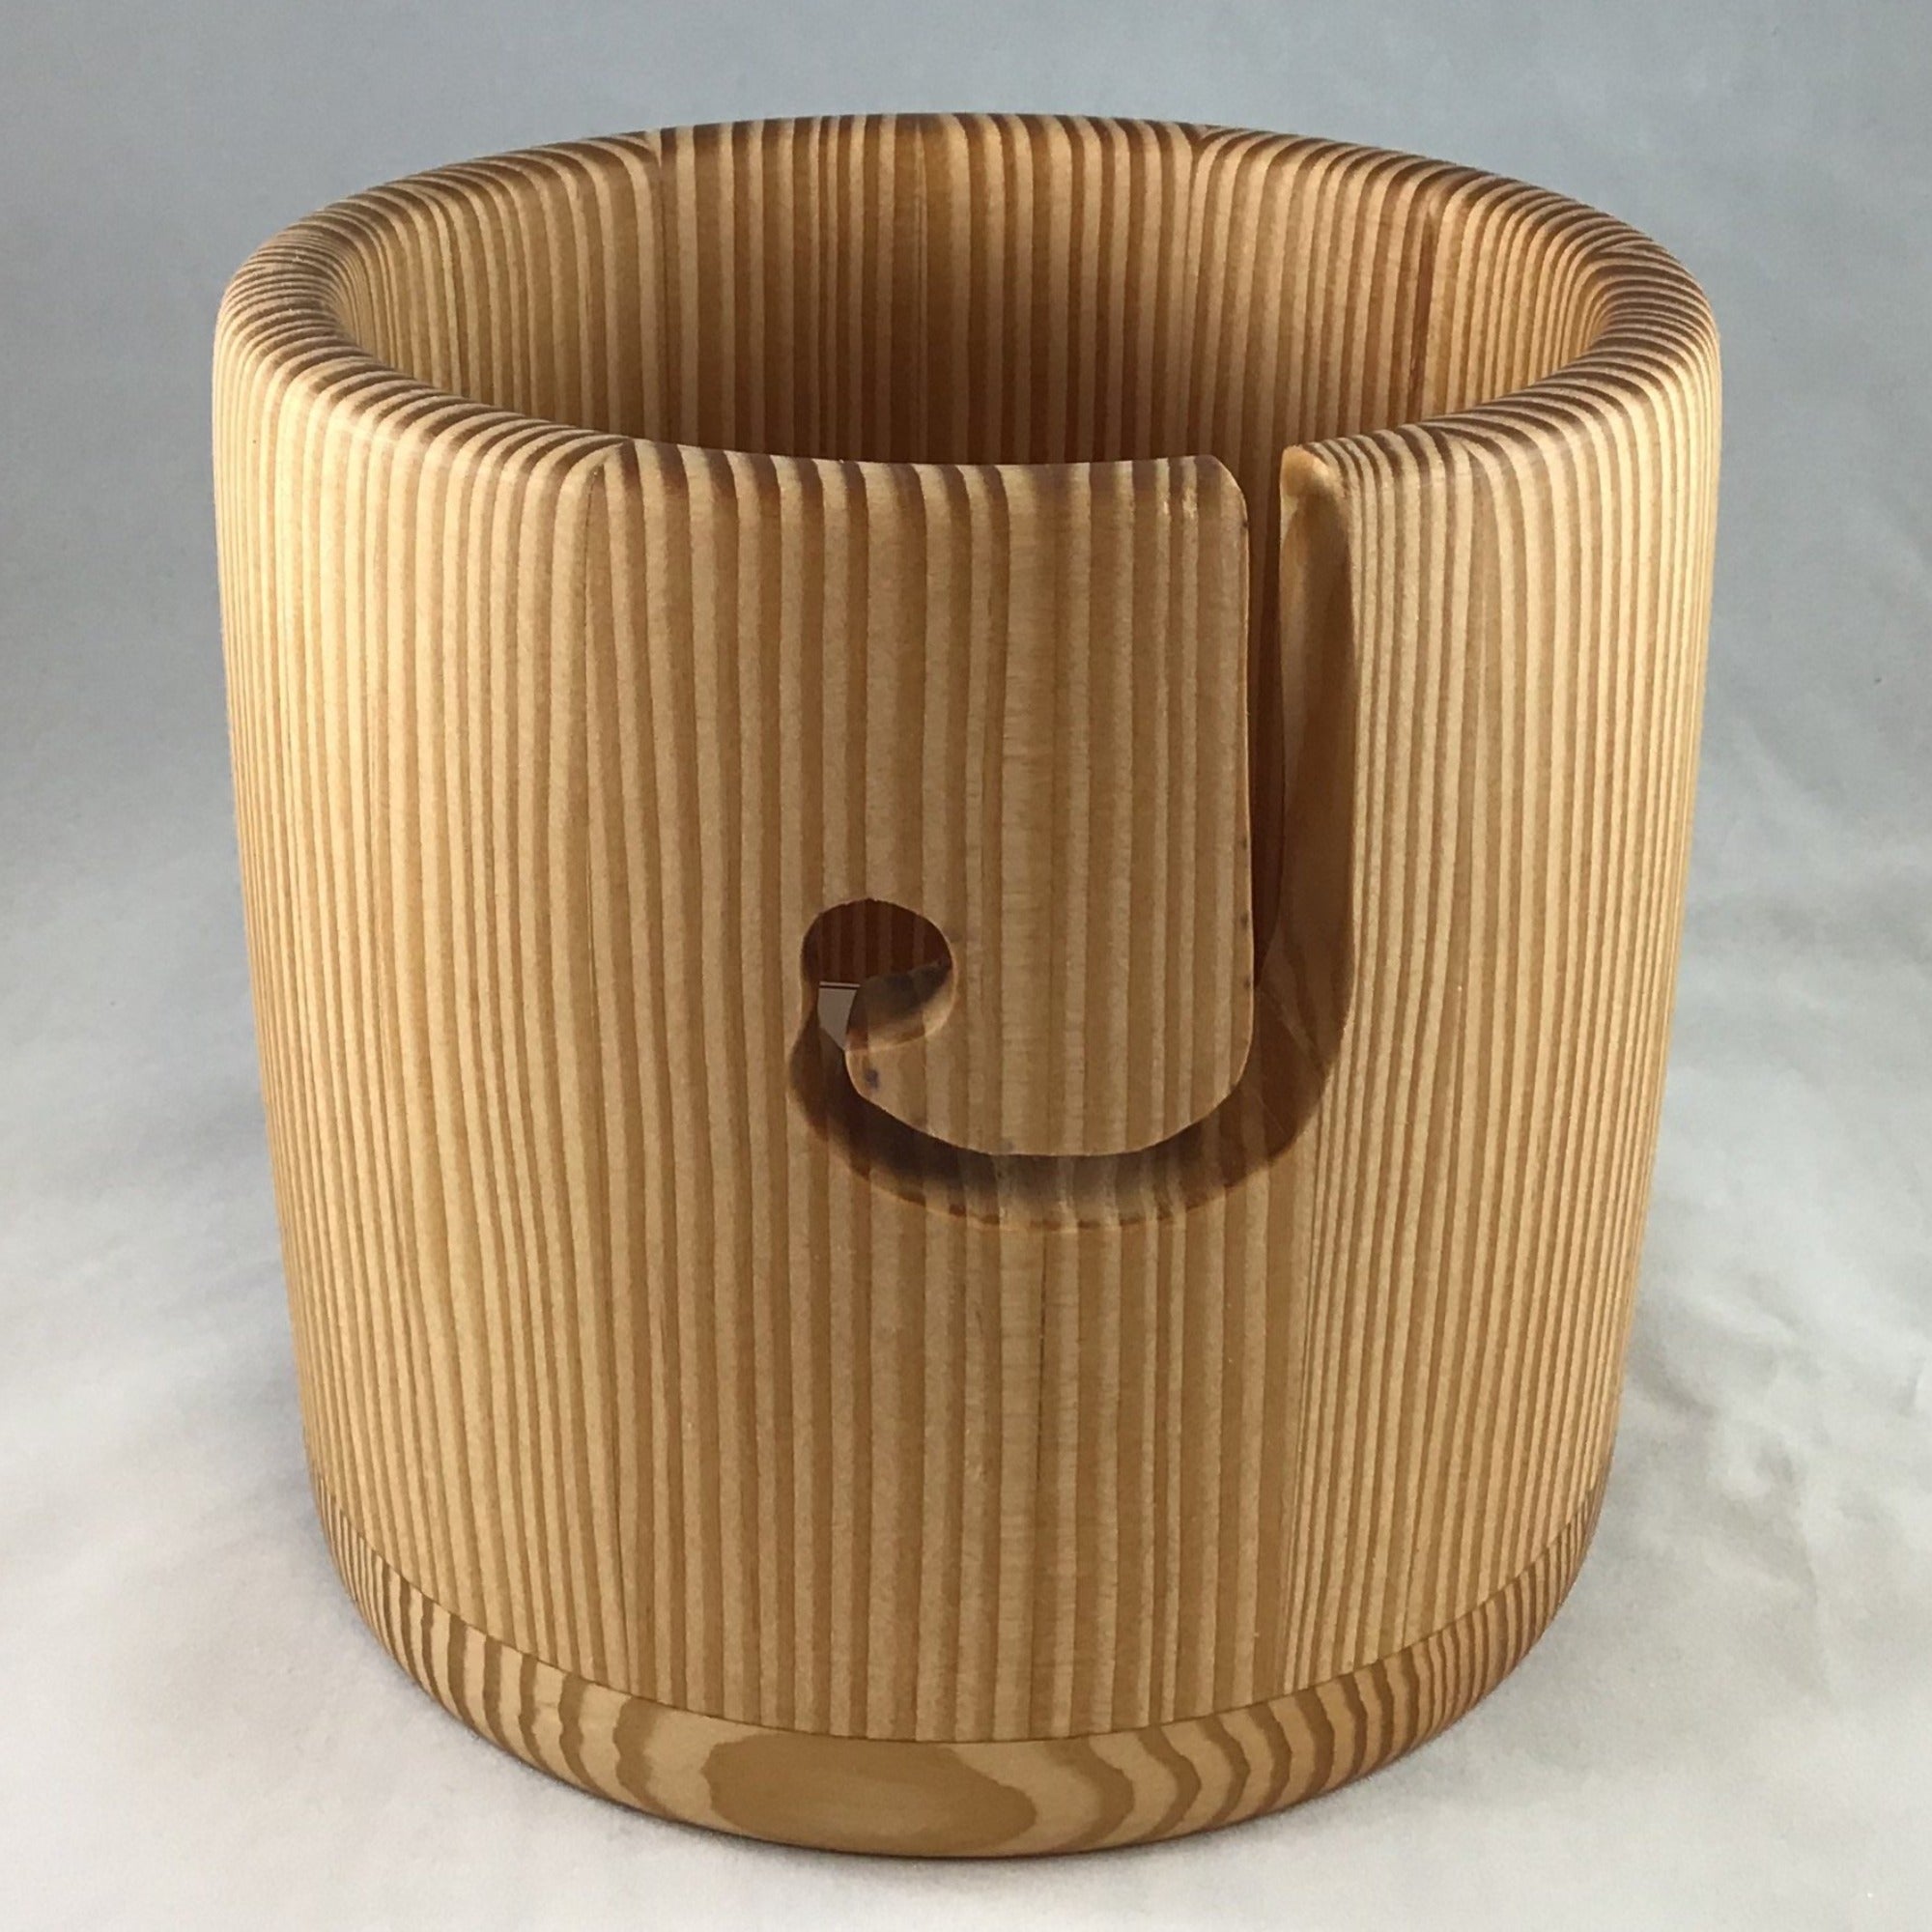 One-of-a-Kind Yarn Bowl by Jerry Ertle – African Mahogany #120